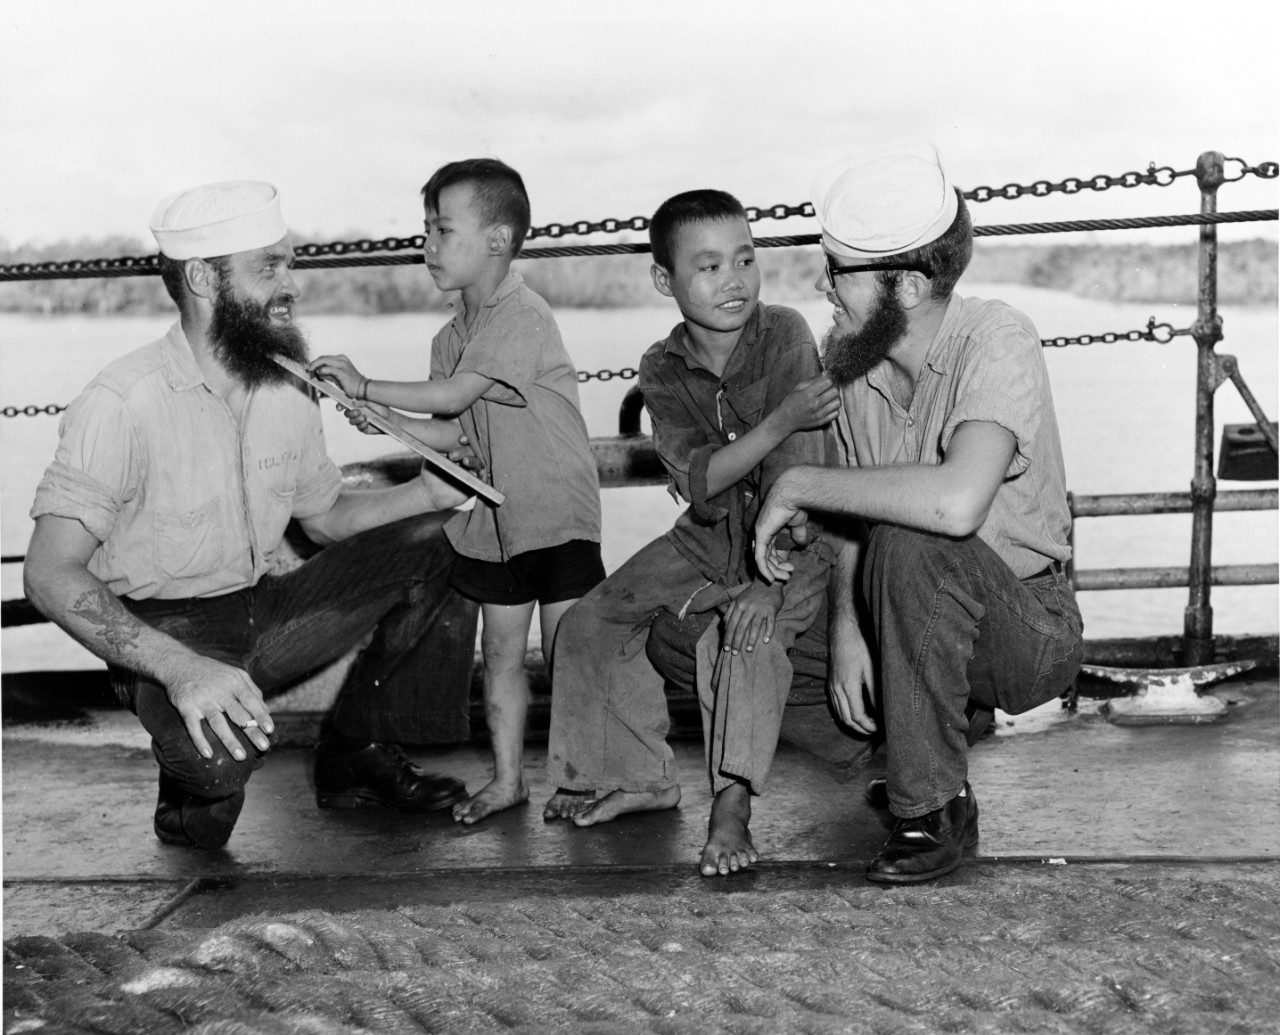 Contestants have their beards inspected by young Vietnamese refugees during the trip from Haiphong to Saigon, August 1954. ENS James I. Hart, USN (left), was declared the winner of the contest conducted among the sailors in the Indo-China area to operate "Passage to Freedom". 